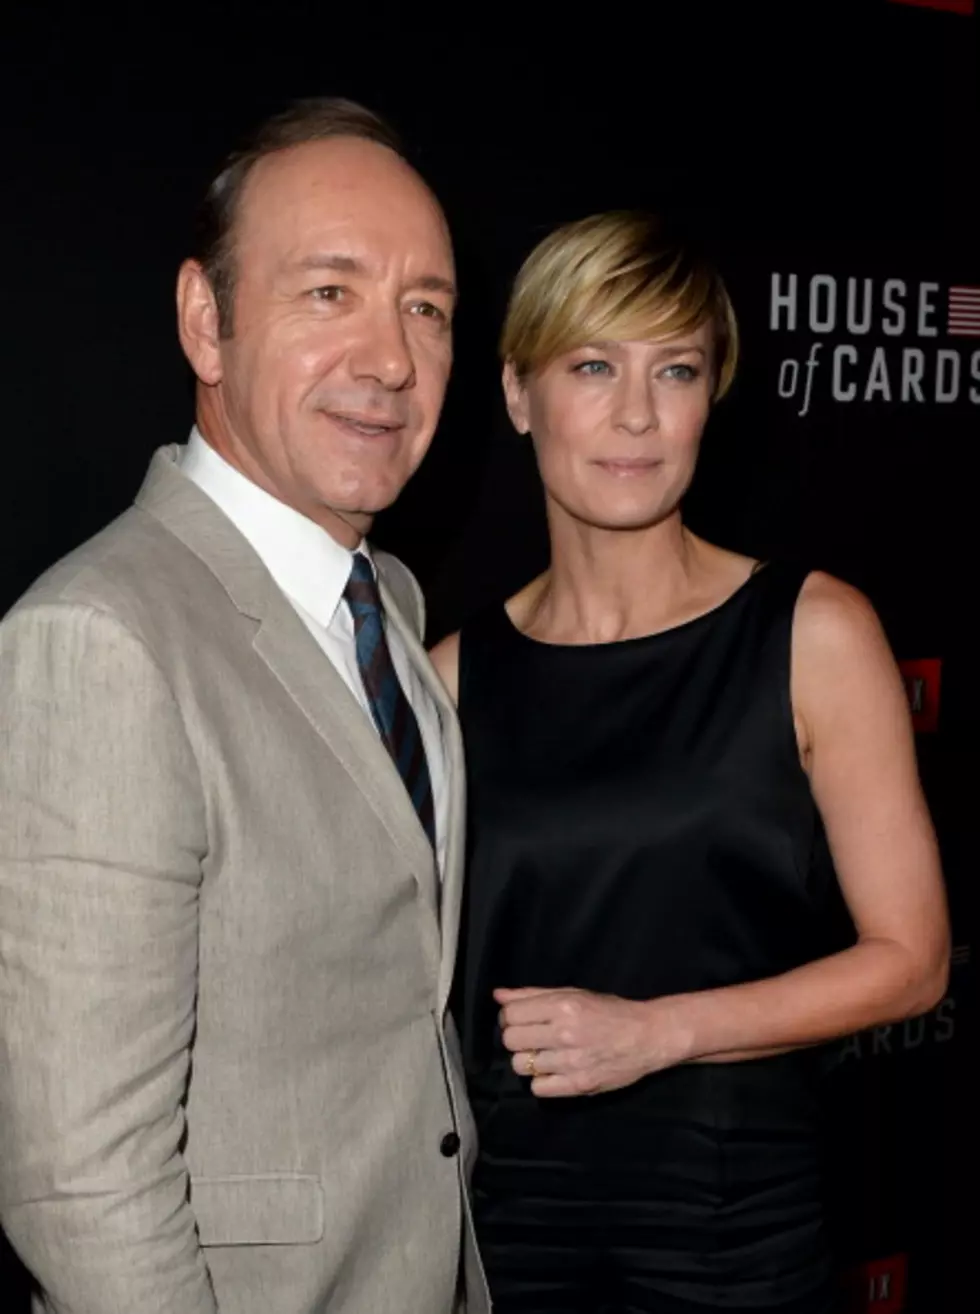 &#8216;House Of Cards&#8217; Season 3 Trailer Is Here! [VIDEO]